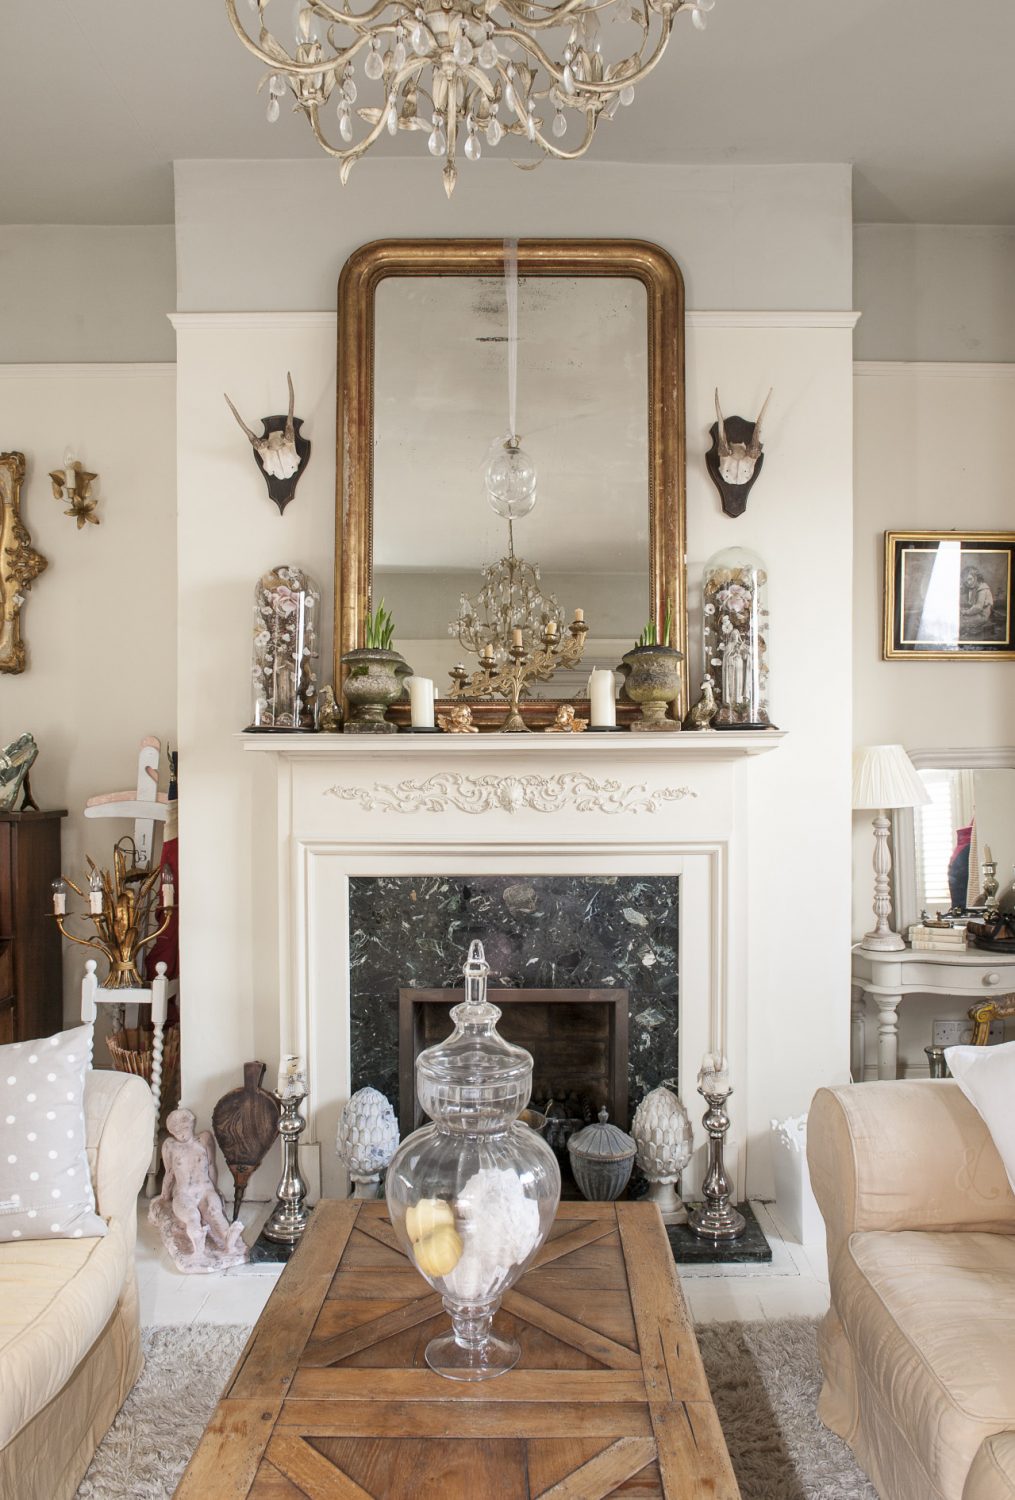 “I love antiques not just for their beauty but their history,” says Minnie. “I love the stories each tell and I love thinking about where they’ve been and what they’ve seen.”